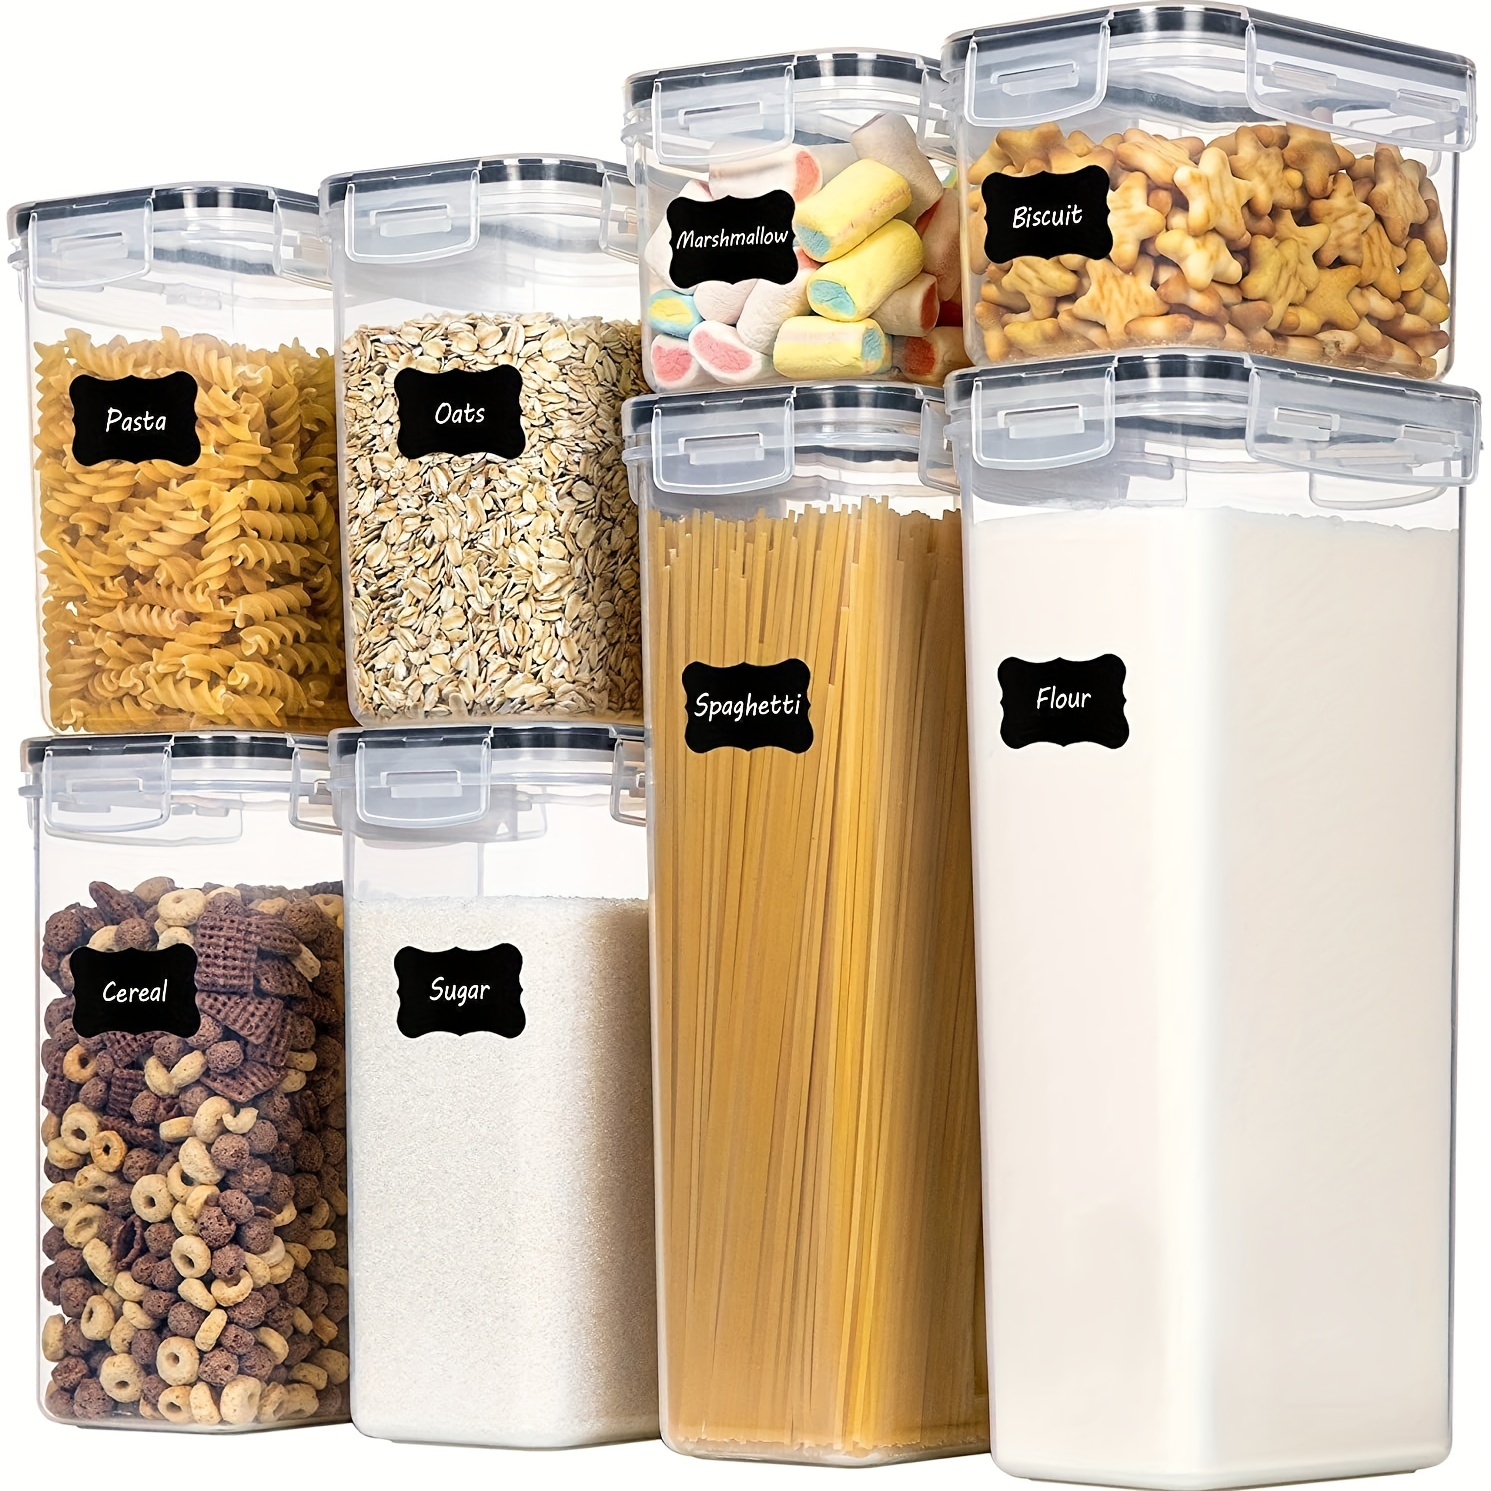 Clear Glass Storage Jars with Lids -Glass Pantry Storage Containers for  Kitchen,Pantry,Flour,Coffee,Cereal,Spice,Beans,Pasta,Powder( Set of 10)